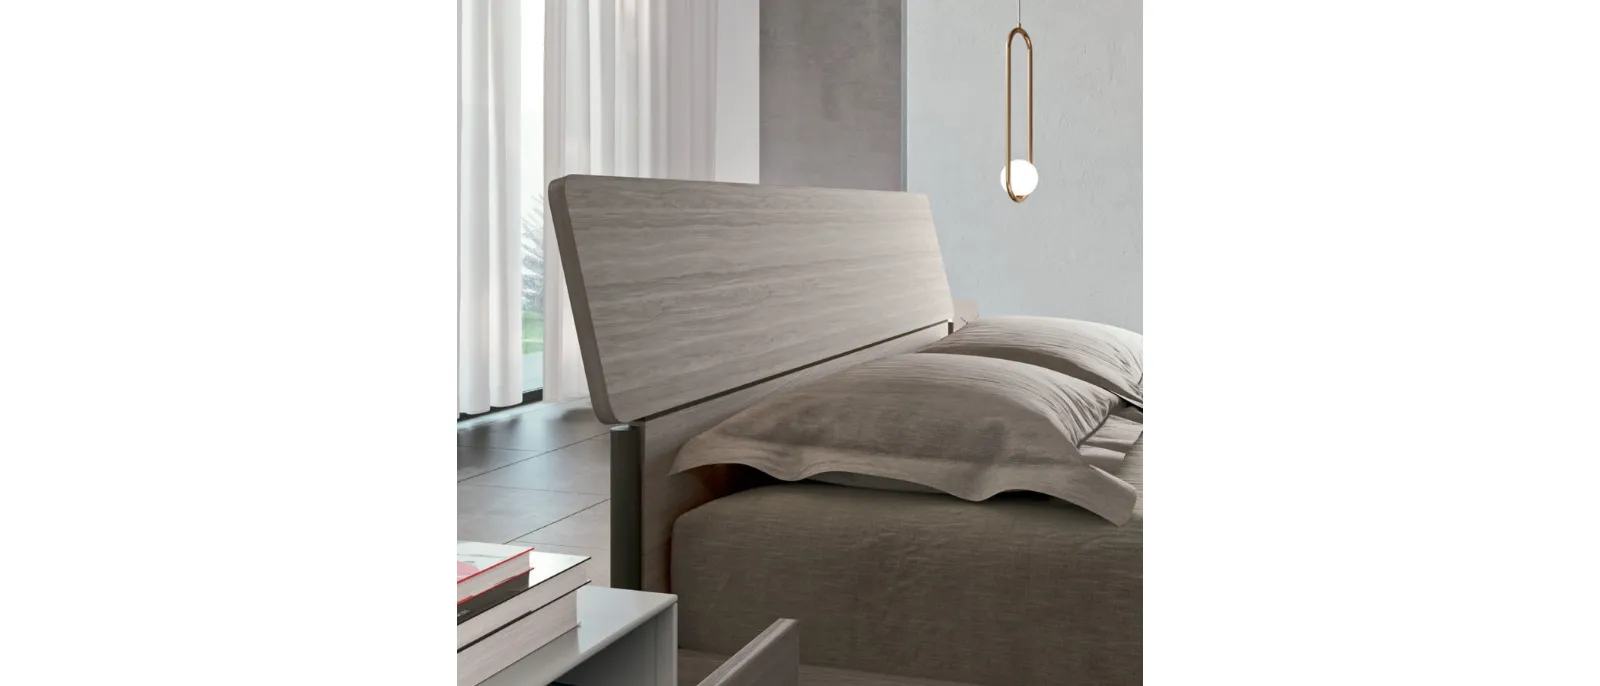 Modern bed with Adele headboard by Orme